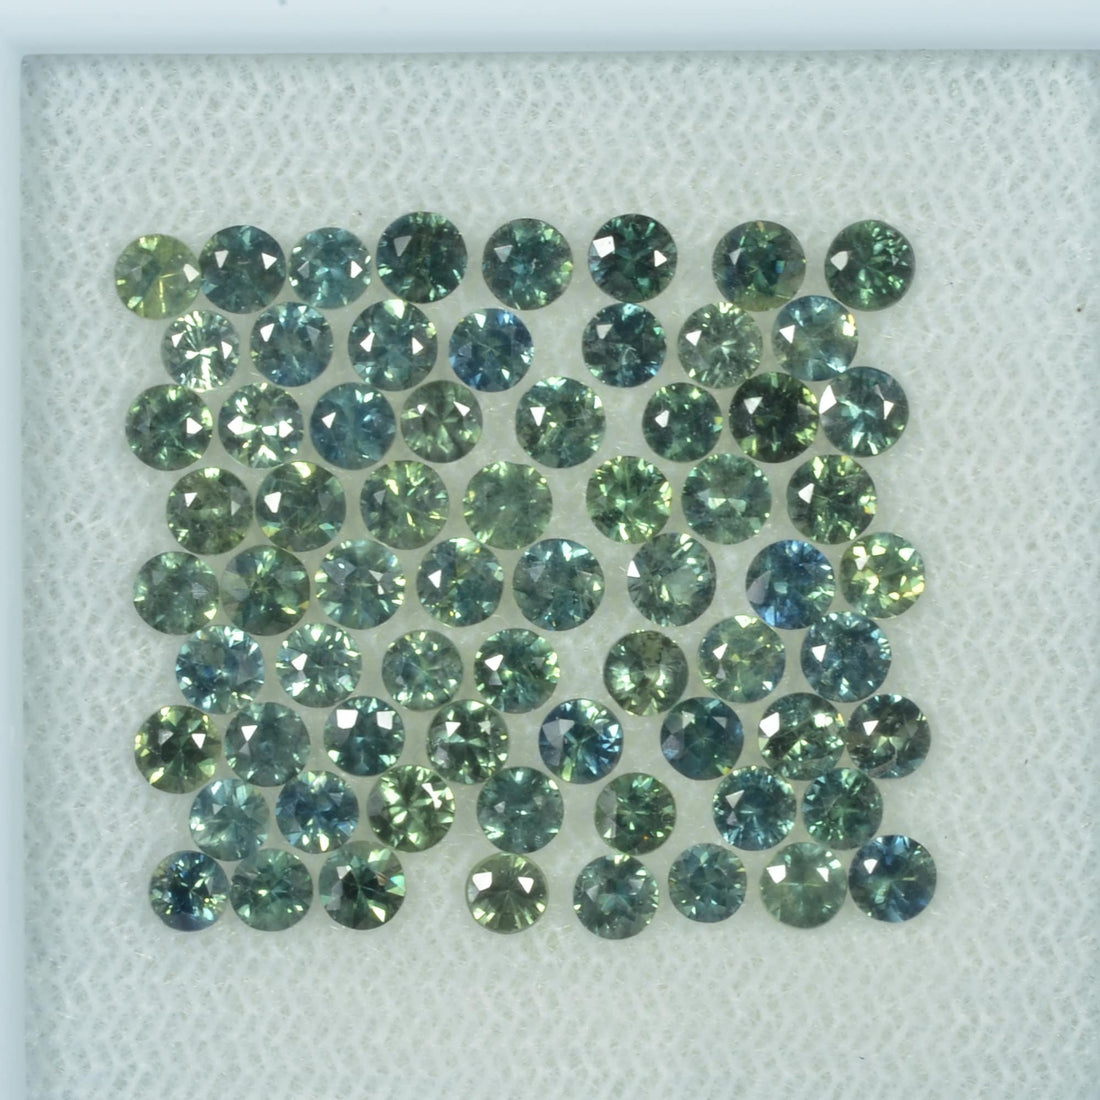 2-3.5 mm Natural Teal Green Sapphire Loose Gemstone Round Diamond Cut Vs Quality Color